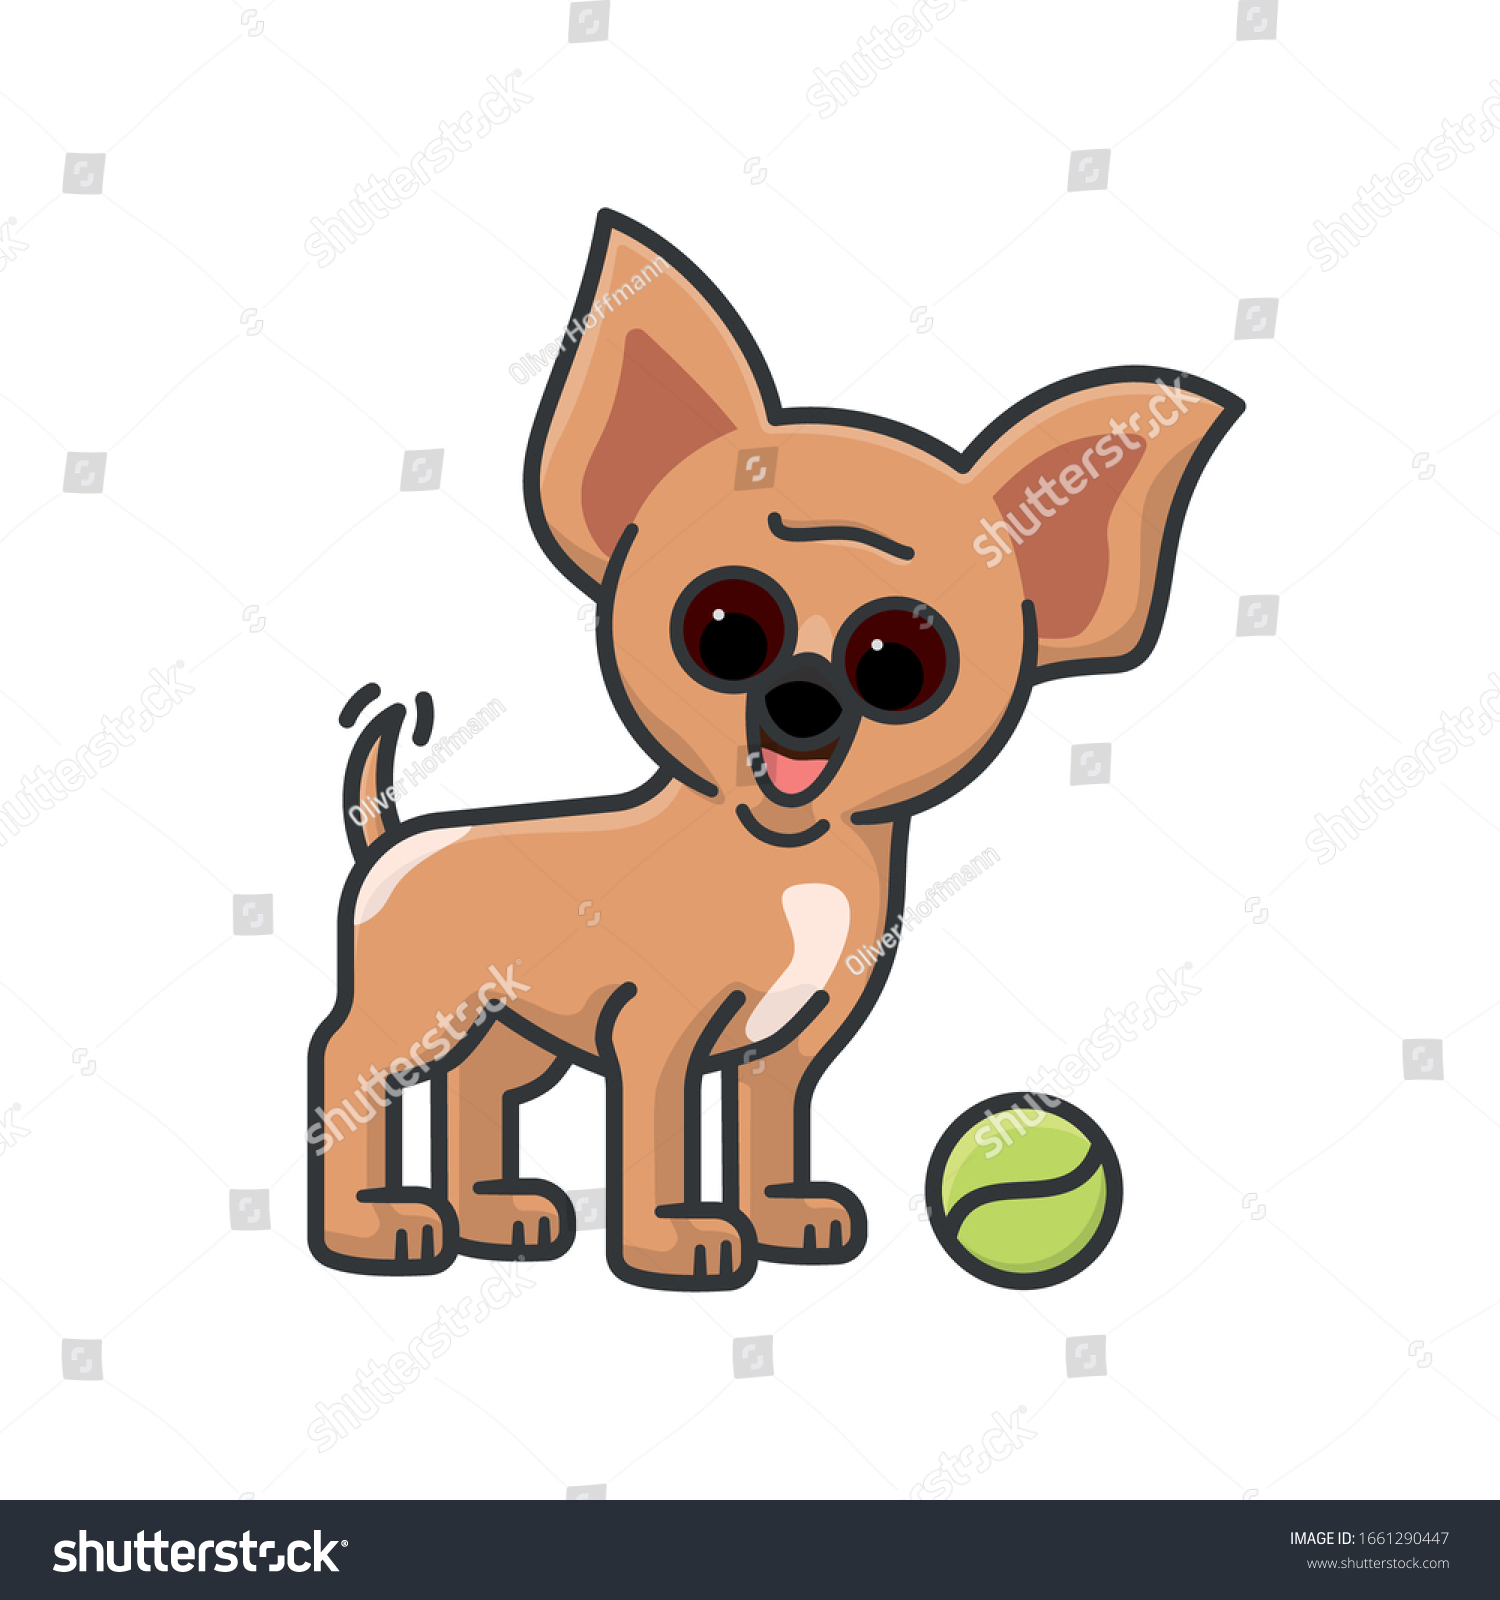 tennis ball with tail